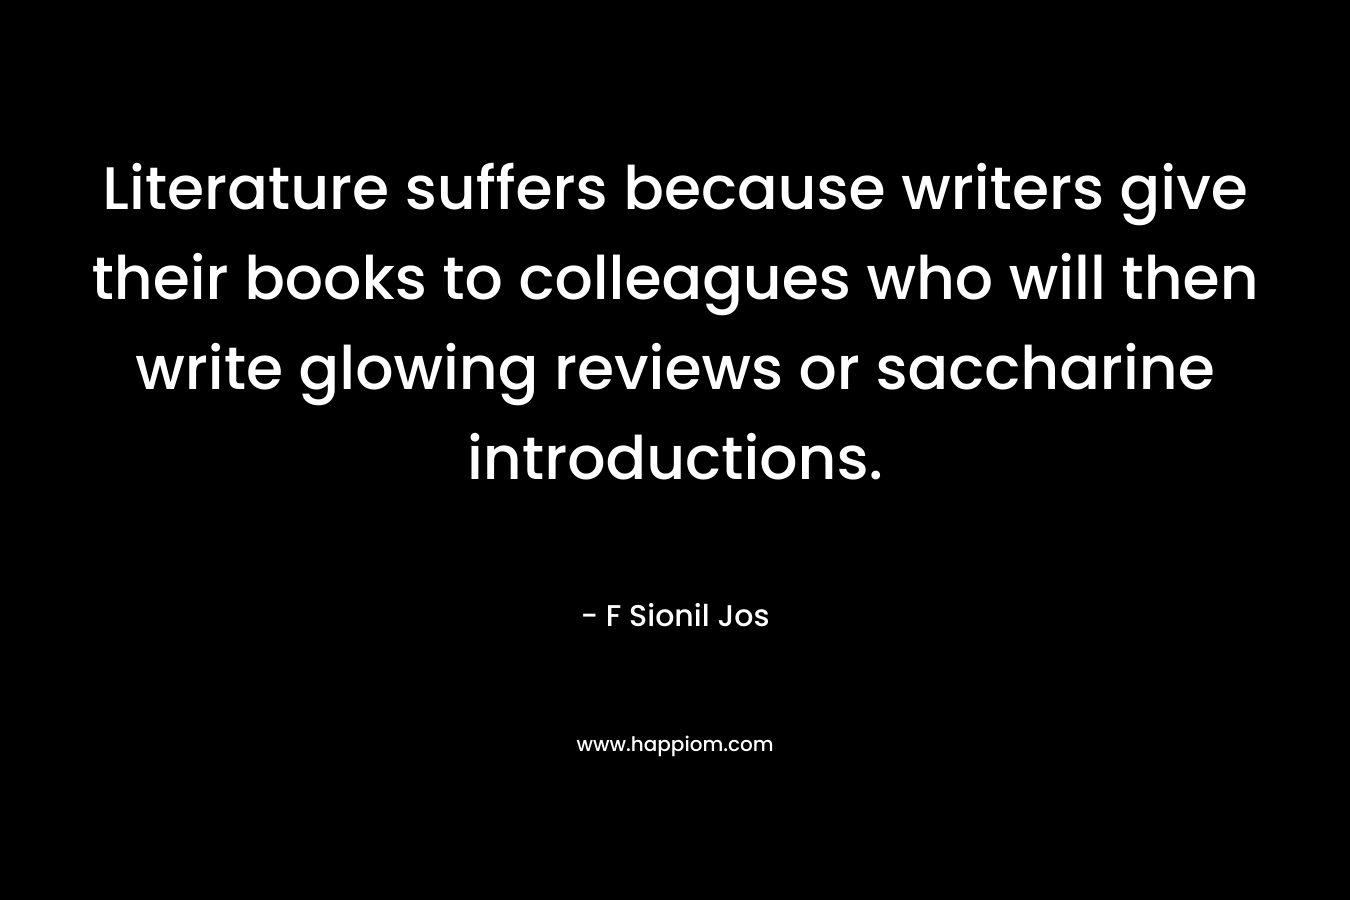 Literature suffers because writers give their books to colleagues who will then write glowing reviews or saccharine introductions. – F Sionil Jos